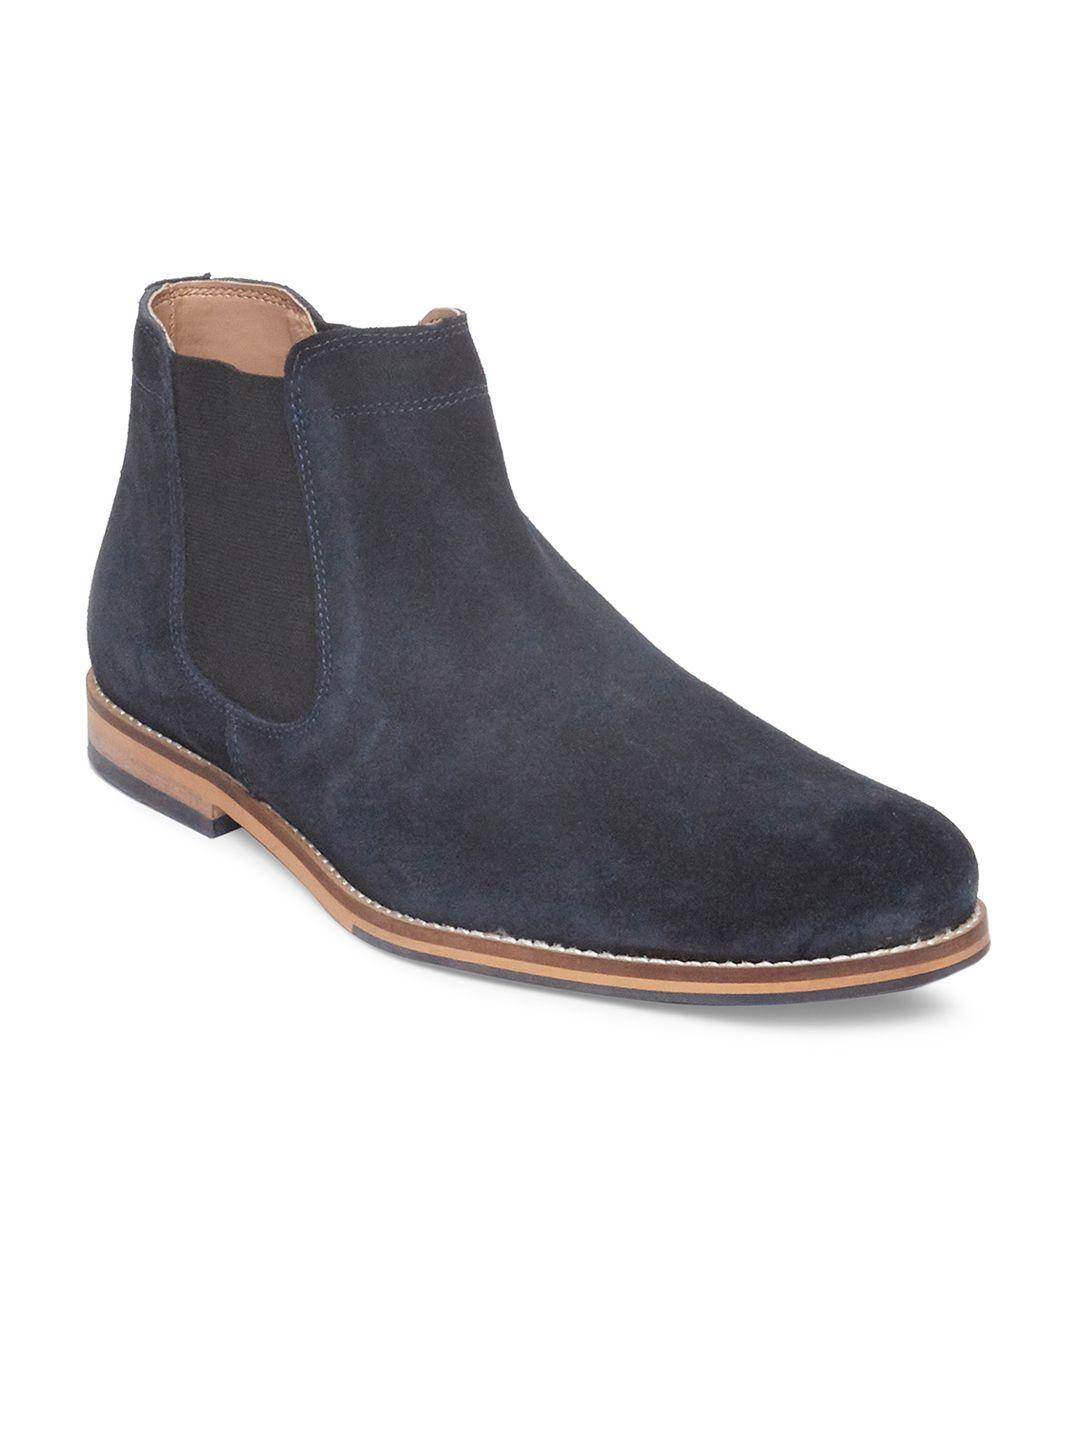 hats off accessories men navy blue woven design suede leather chelsea boots